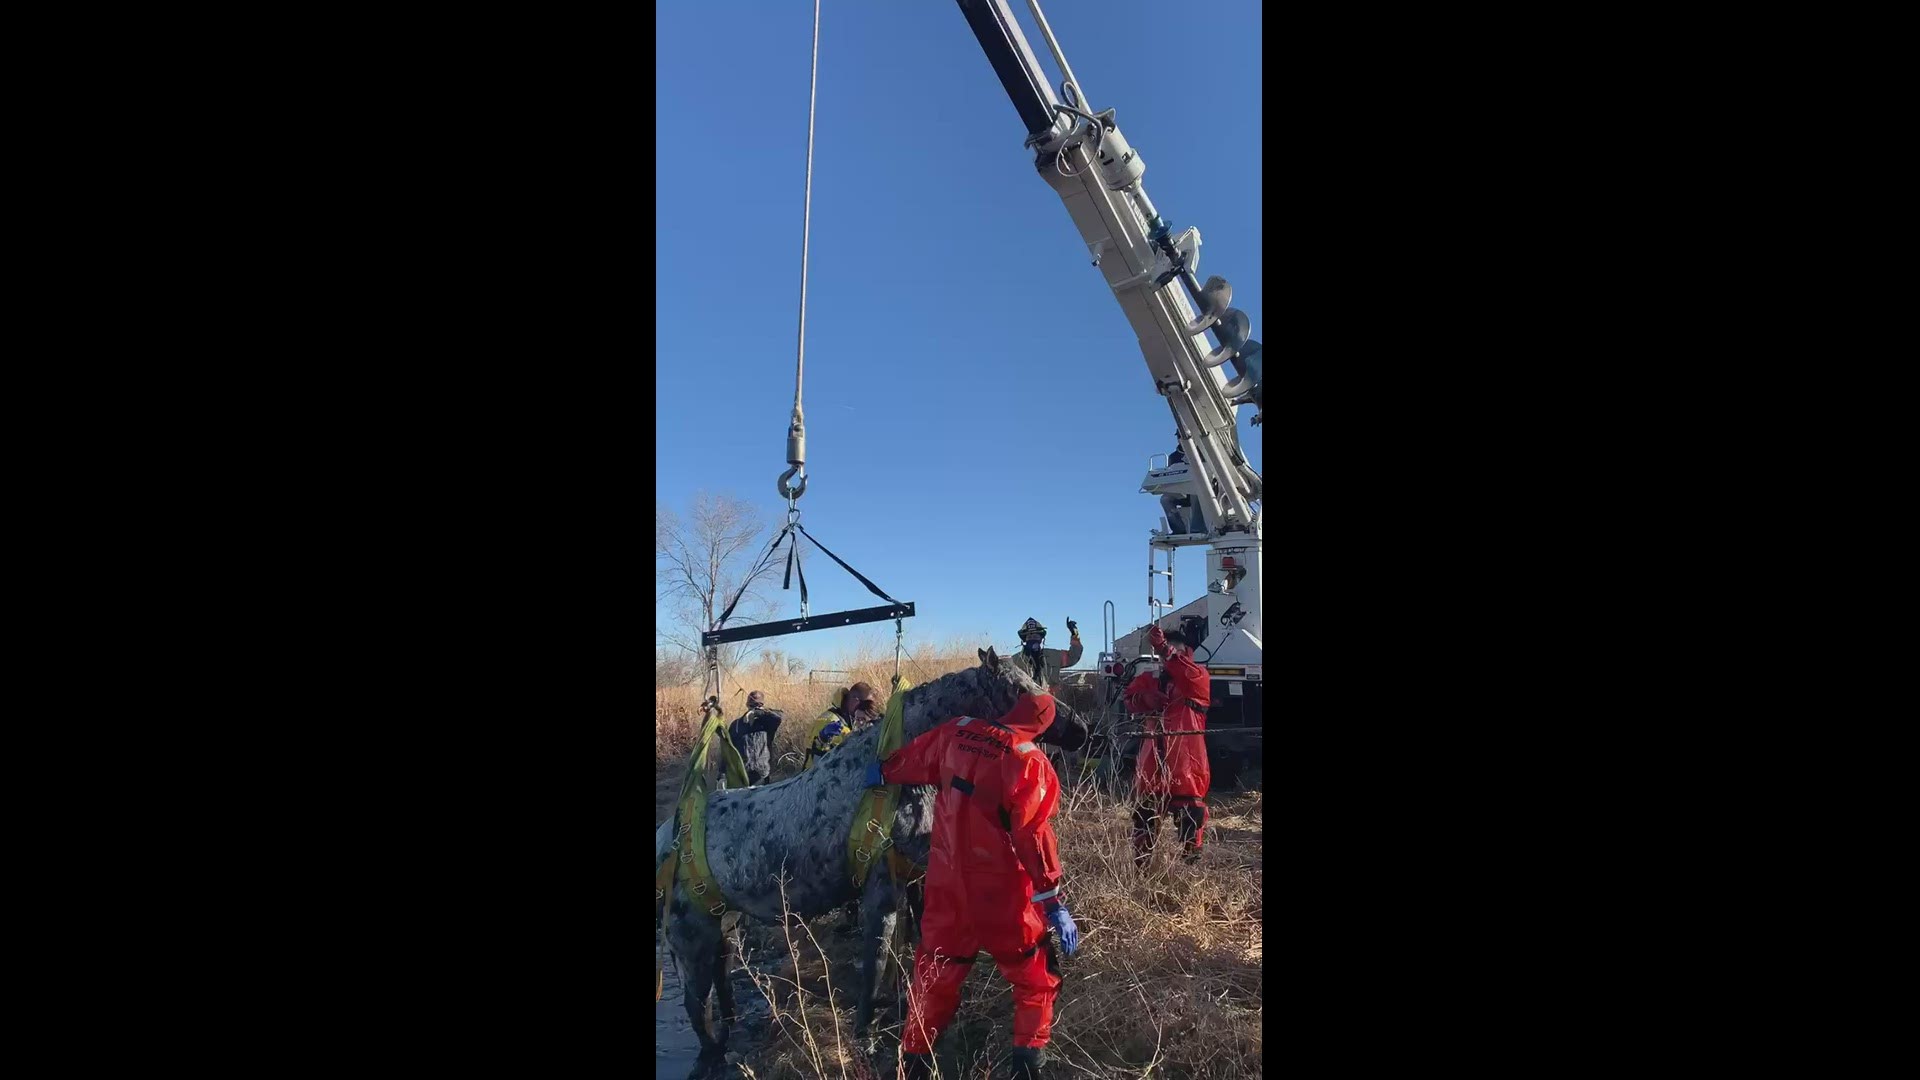 The horse, Buddy, got stuck in the pond overnight and needed help from a City of Loveland crane to get out, according to Loveland Fire Rescue Authority.